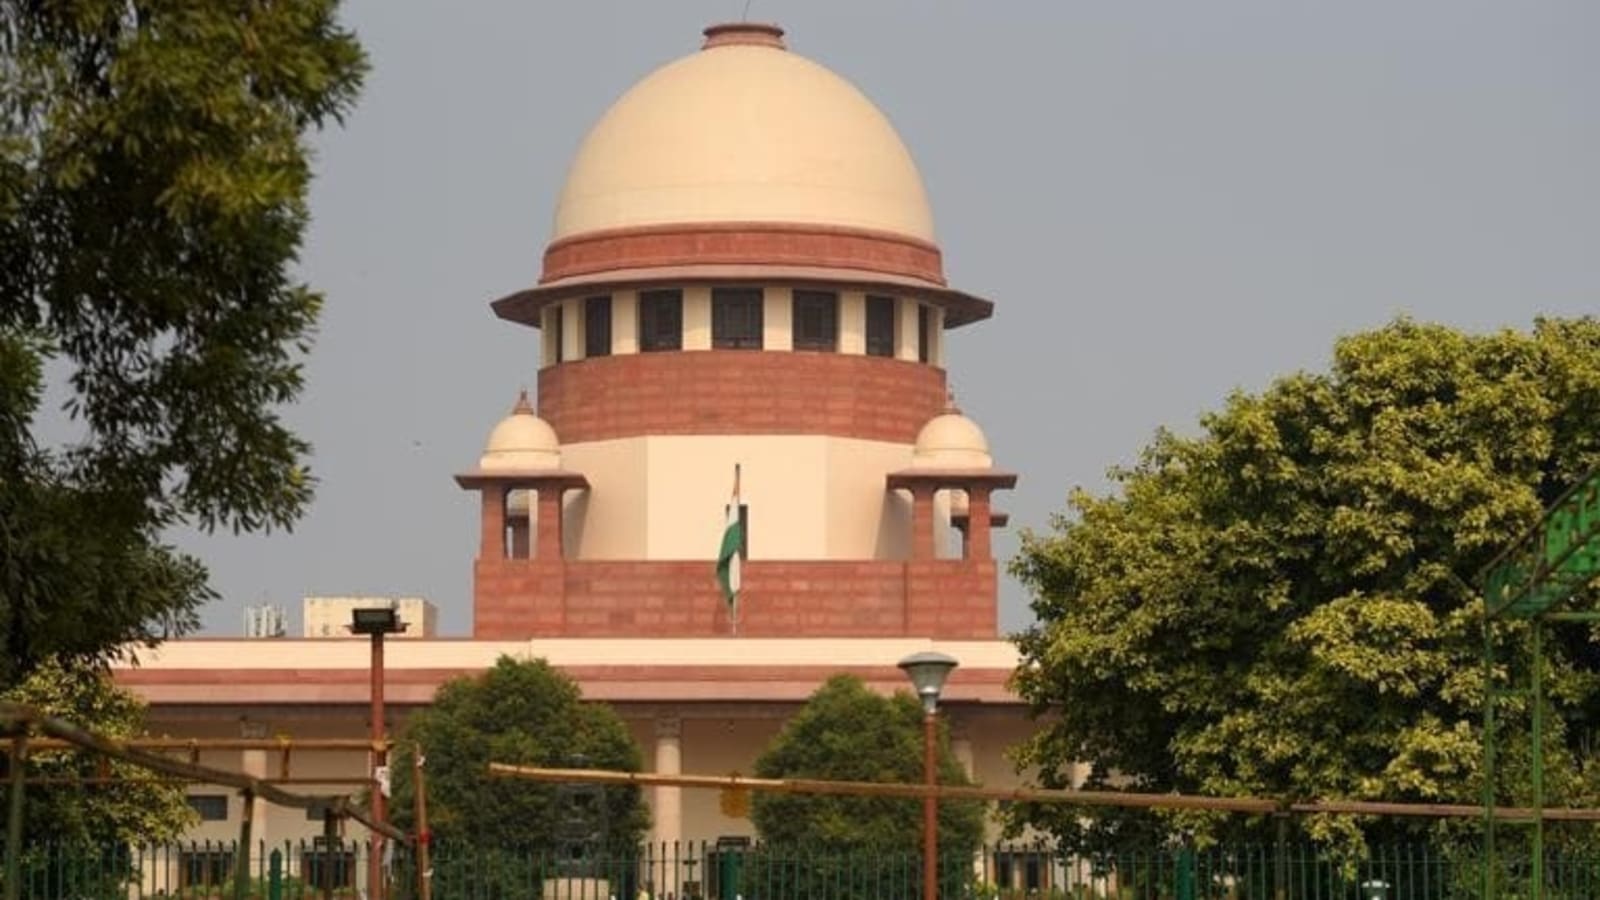 Pegasus row: Only two devices given for probe, says Supreme Court panel | Latest News India